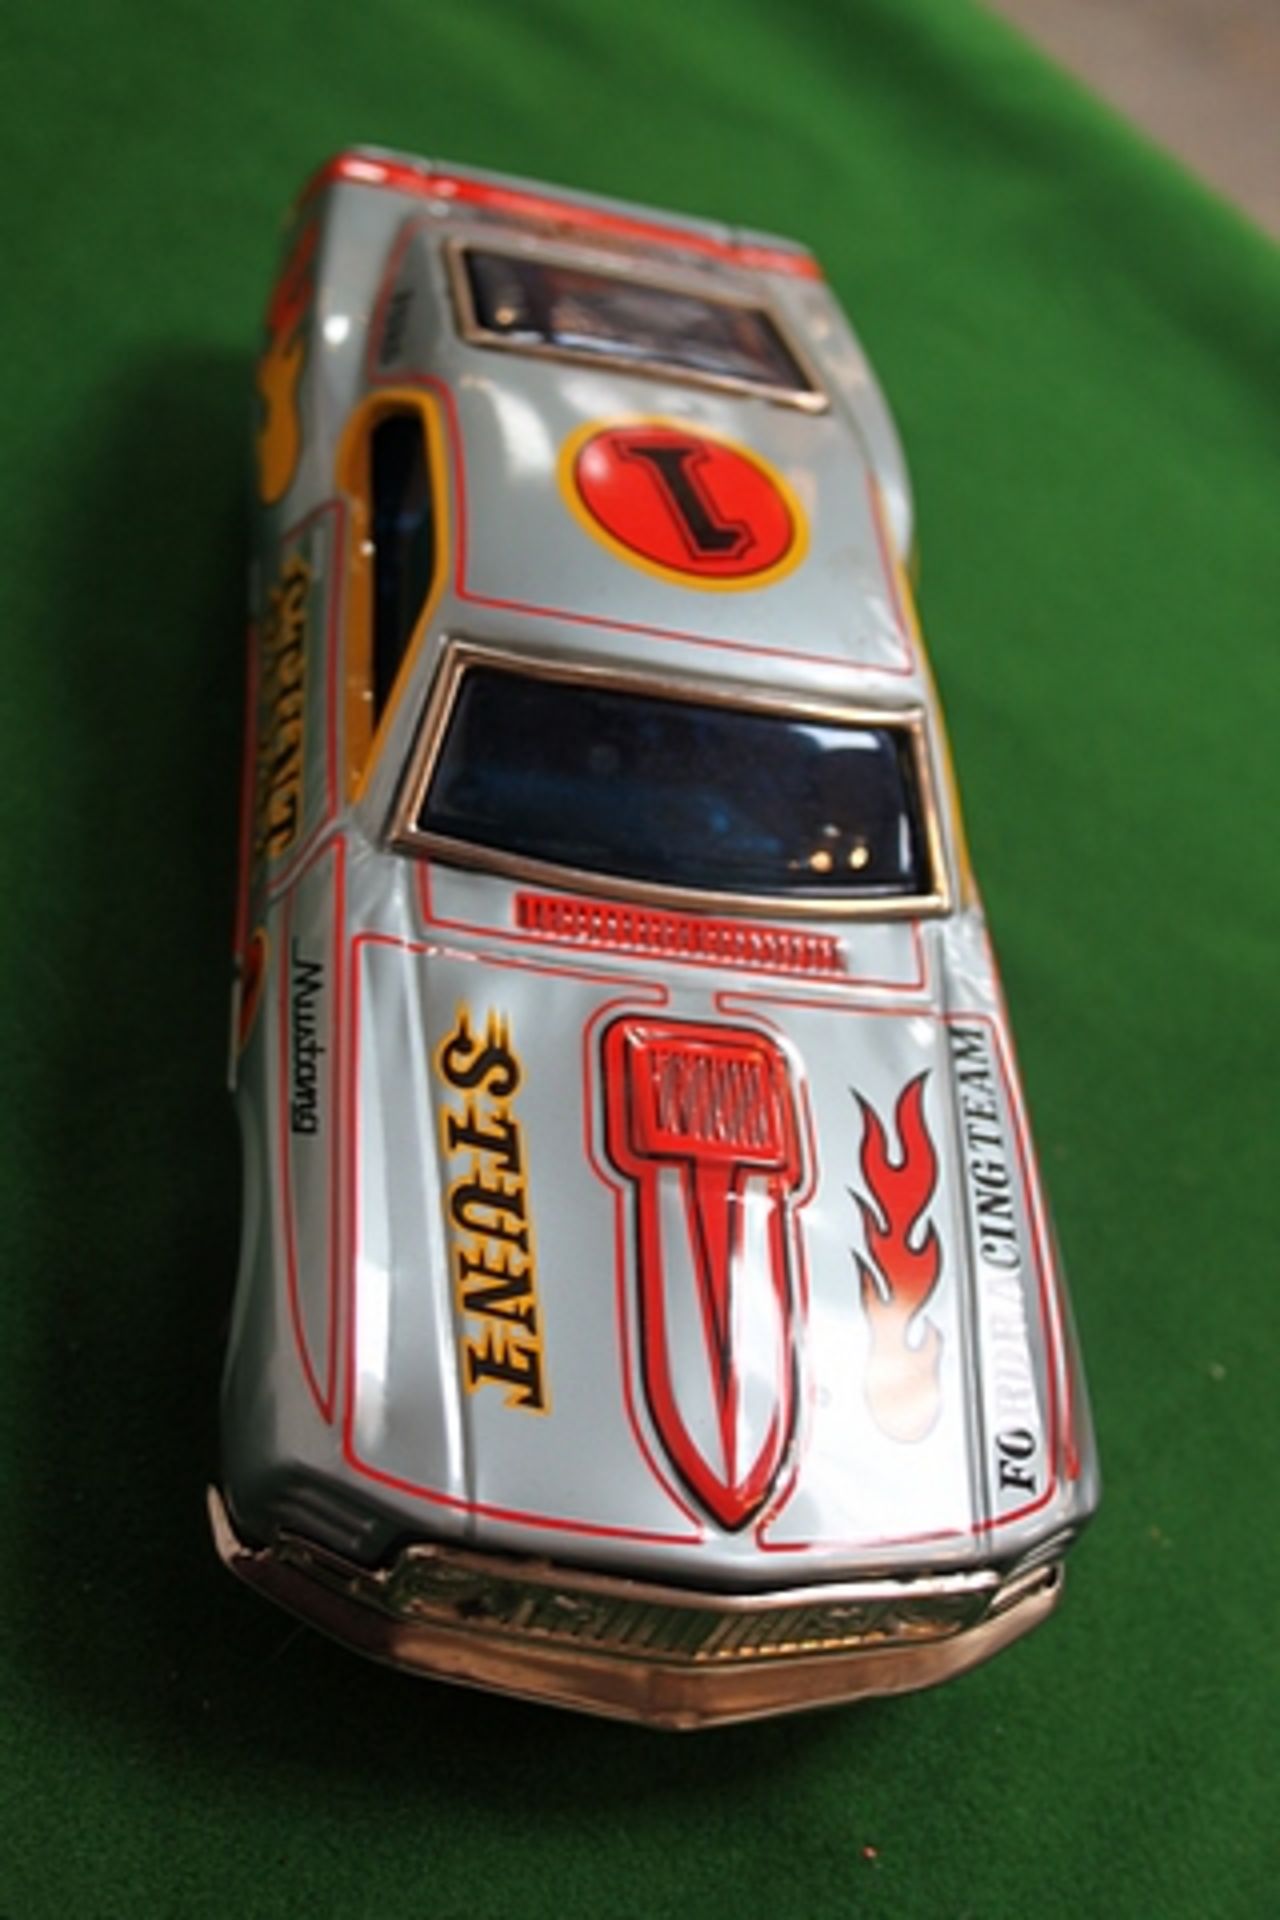 Tokyo Plaything Shokai Co. TPS Japan Battery Operated Champion Stunt Car 10.5 Inches Battery - Image 2 of 2